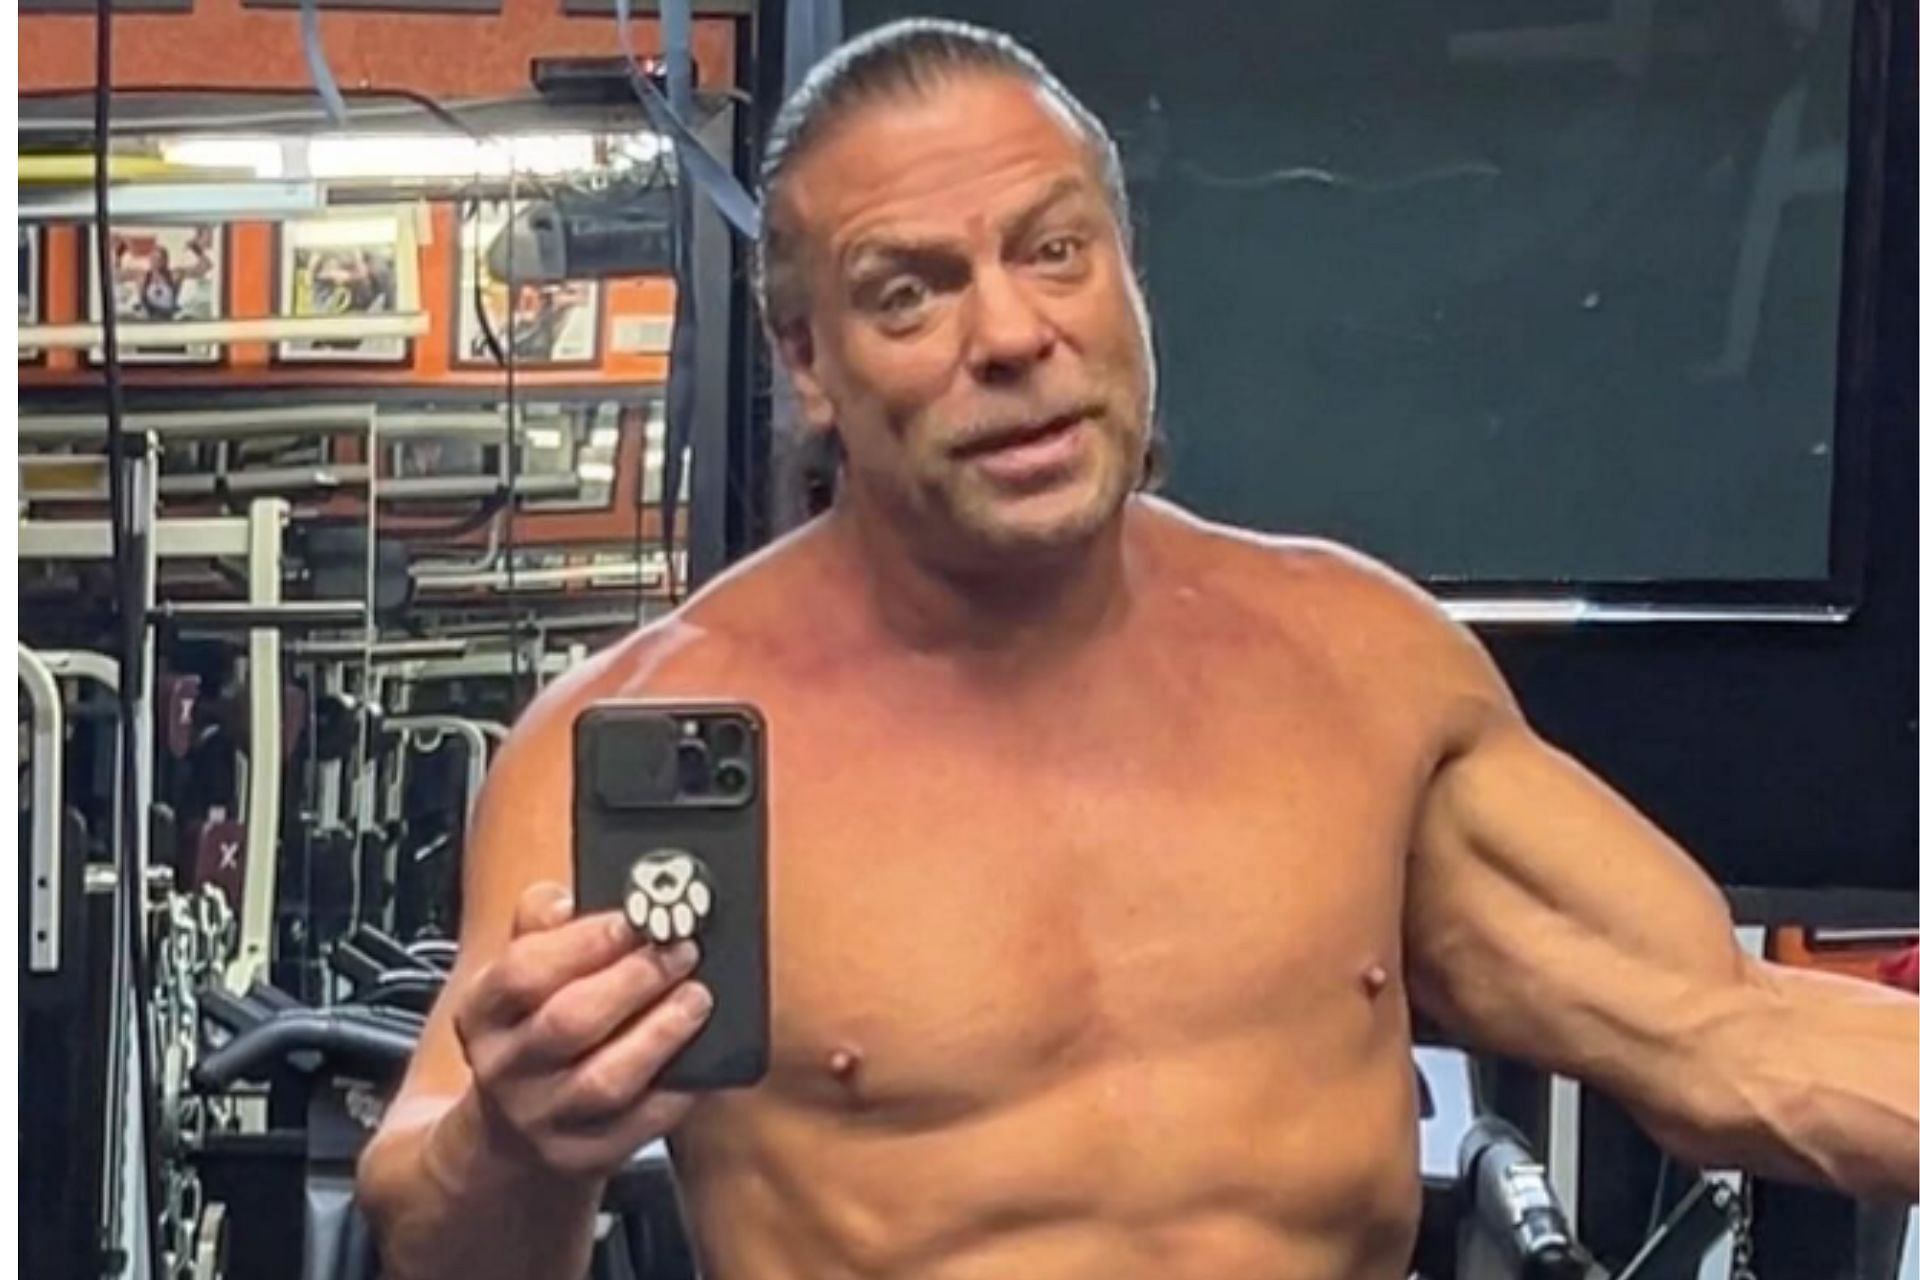 RVD took to social media to speak about his AEW spot [Image Credit: RVD Instagram]